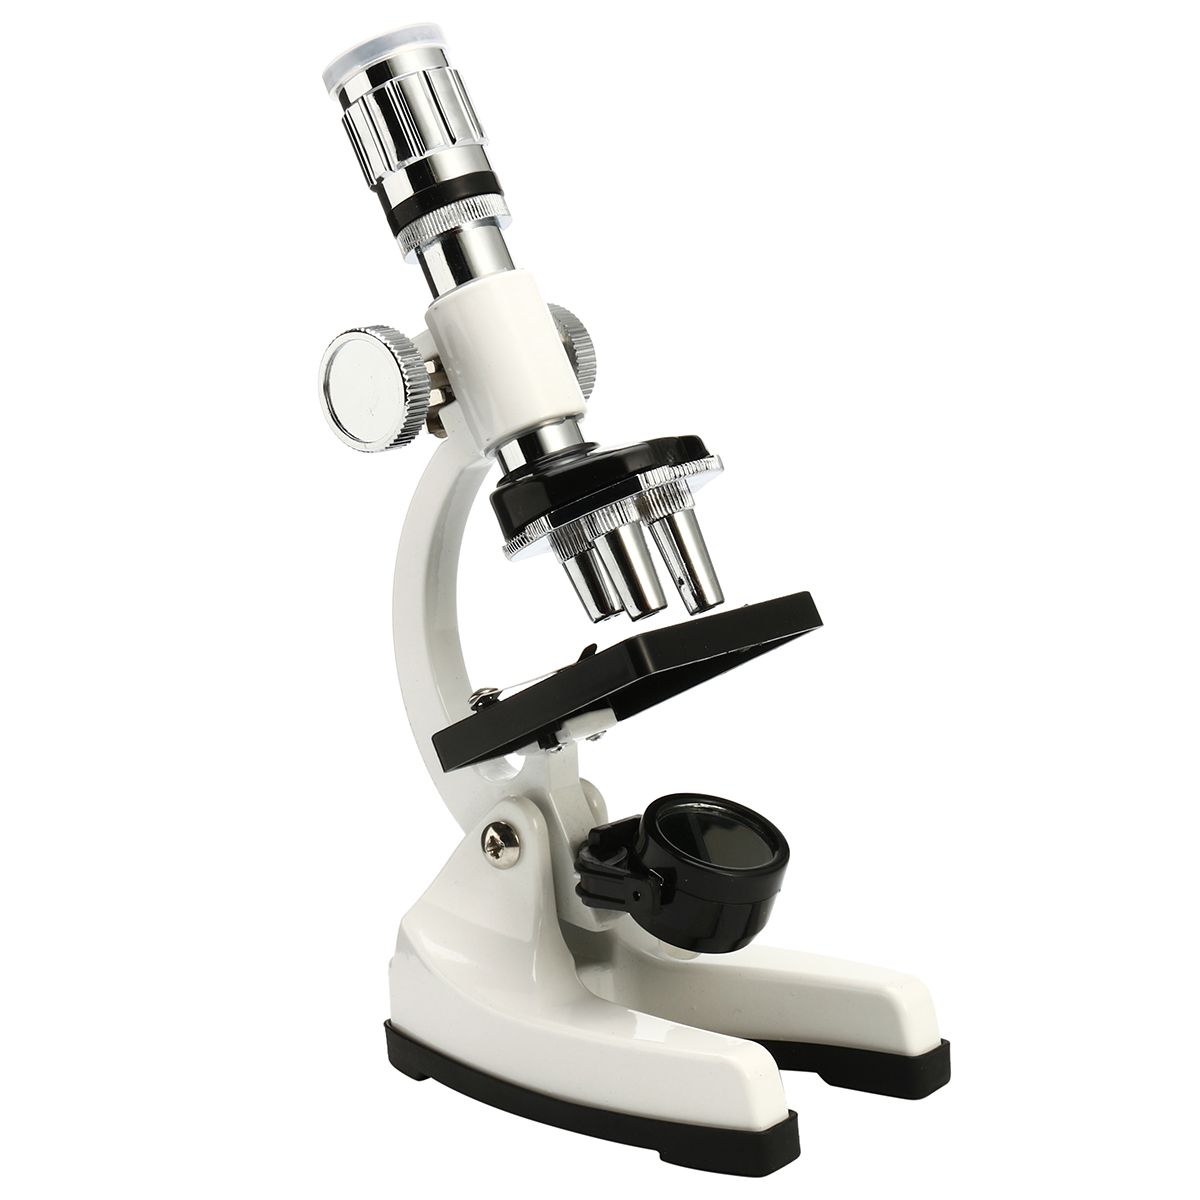 Zoom-Microscope-Kit-Lab-400X-600X-1200X-Magnification-Beginner-For-Kids-Students-1332822